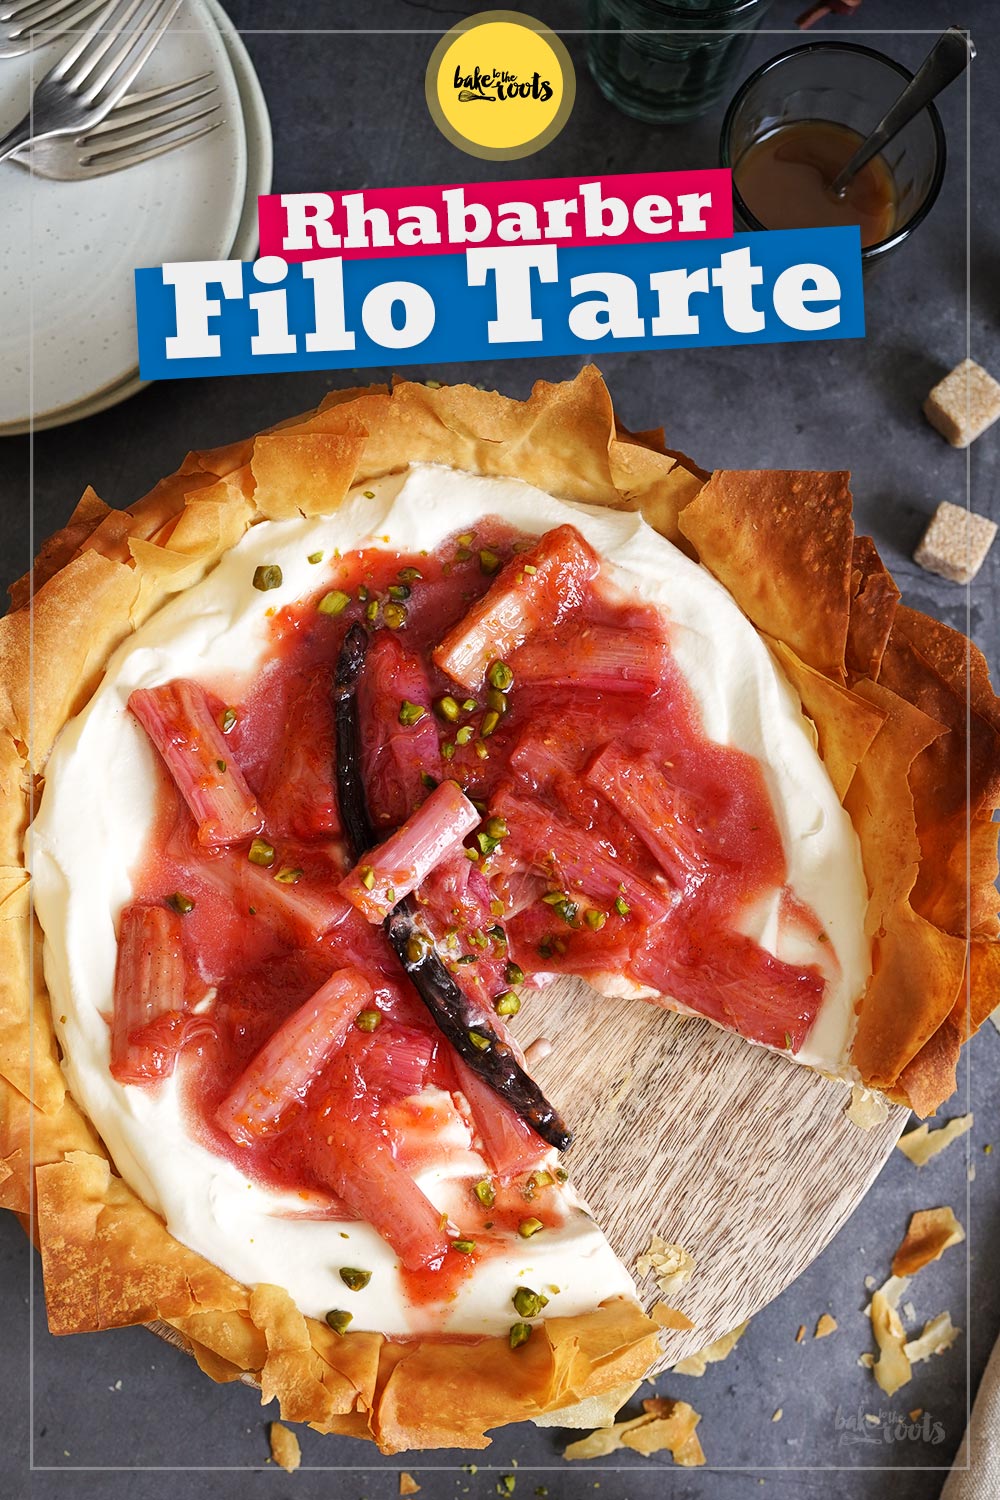 Rhabarber Filo Tarte | Bake to the roots